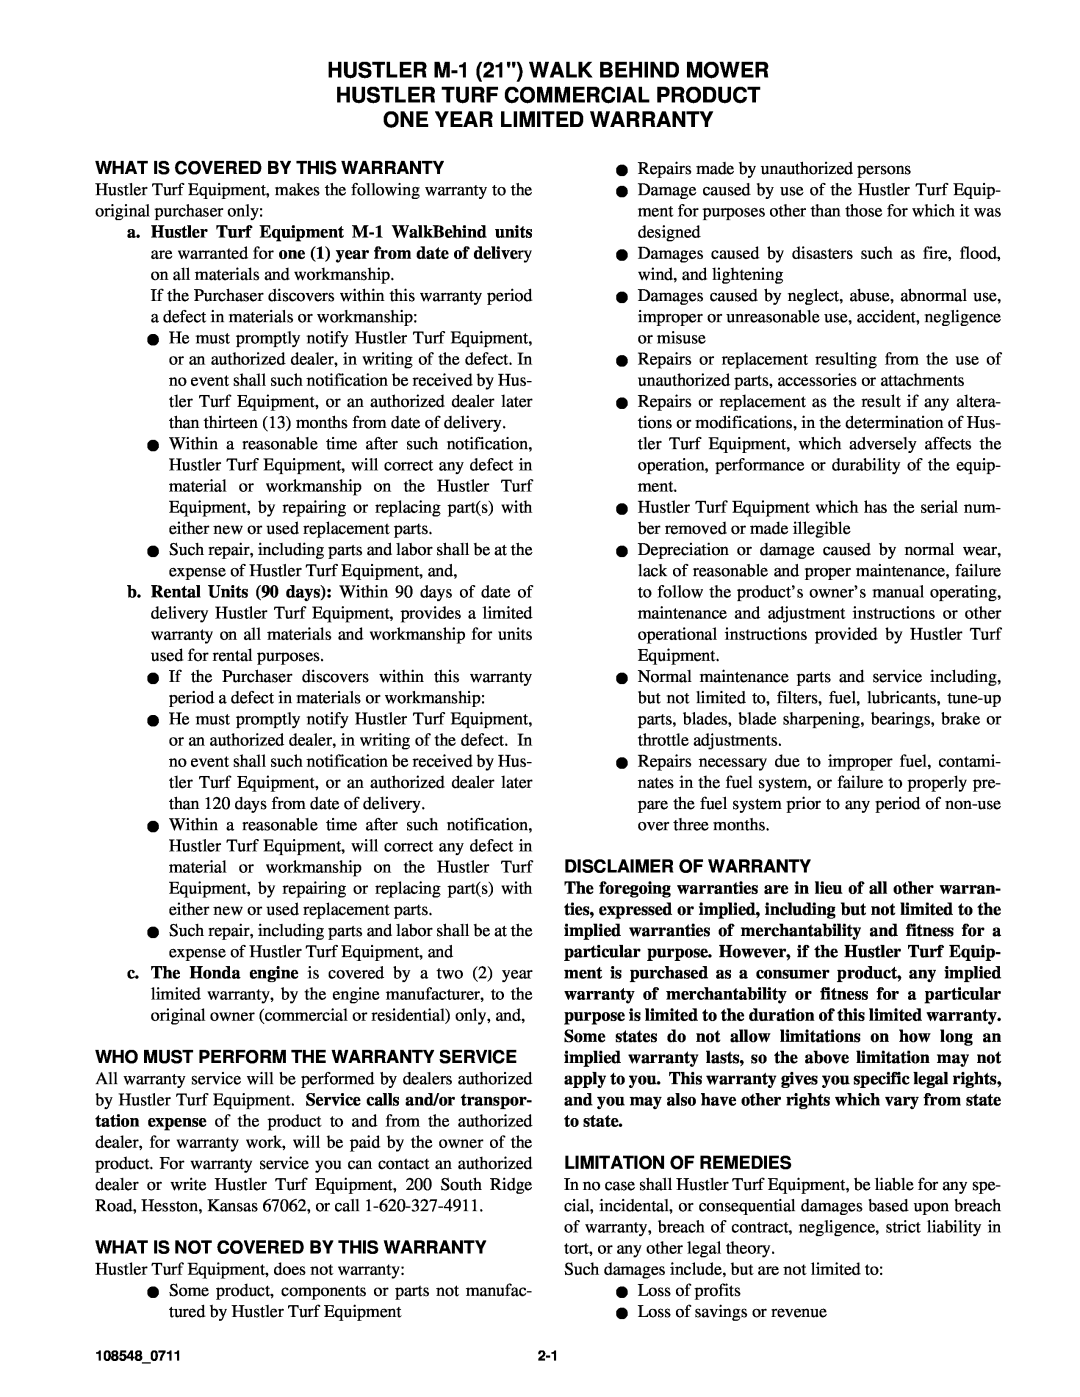 Hustler Turf M1 owner manual What Is Covered By This Warranty, Disclaimer Of Warranty, Limitation Of Remedies 